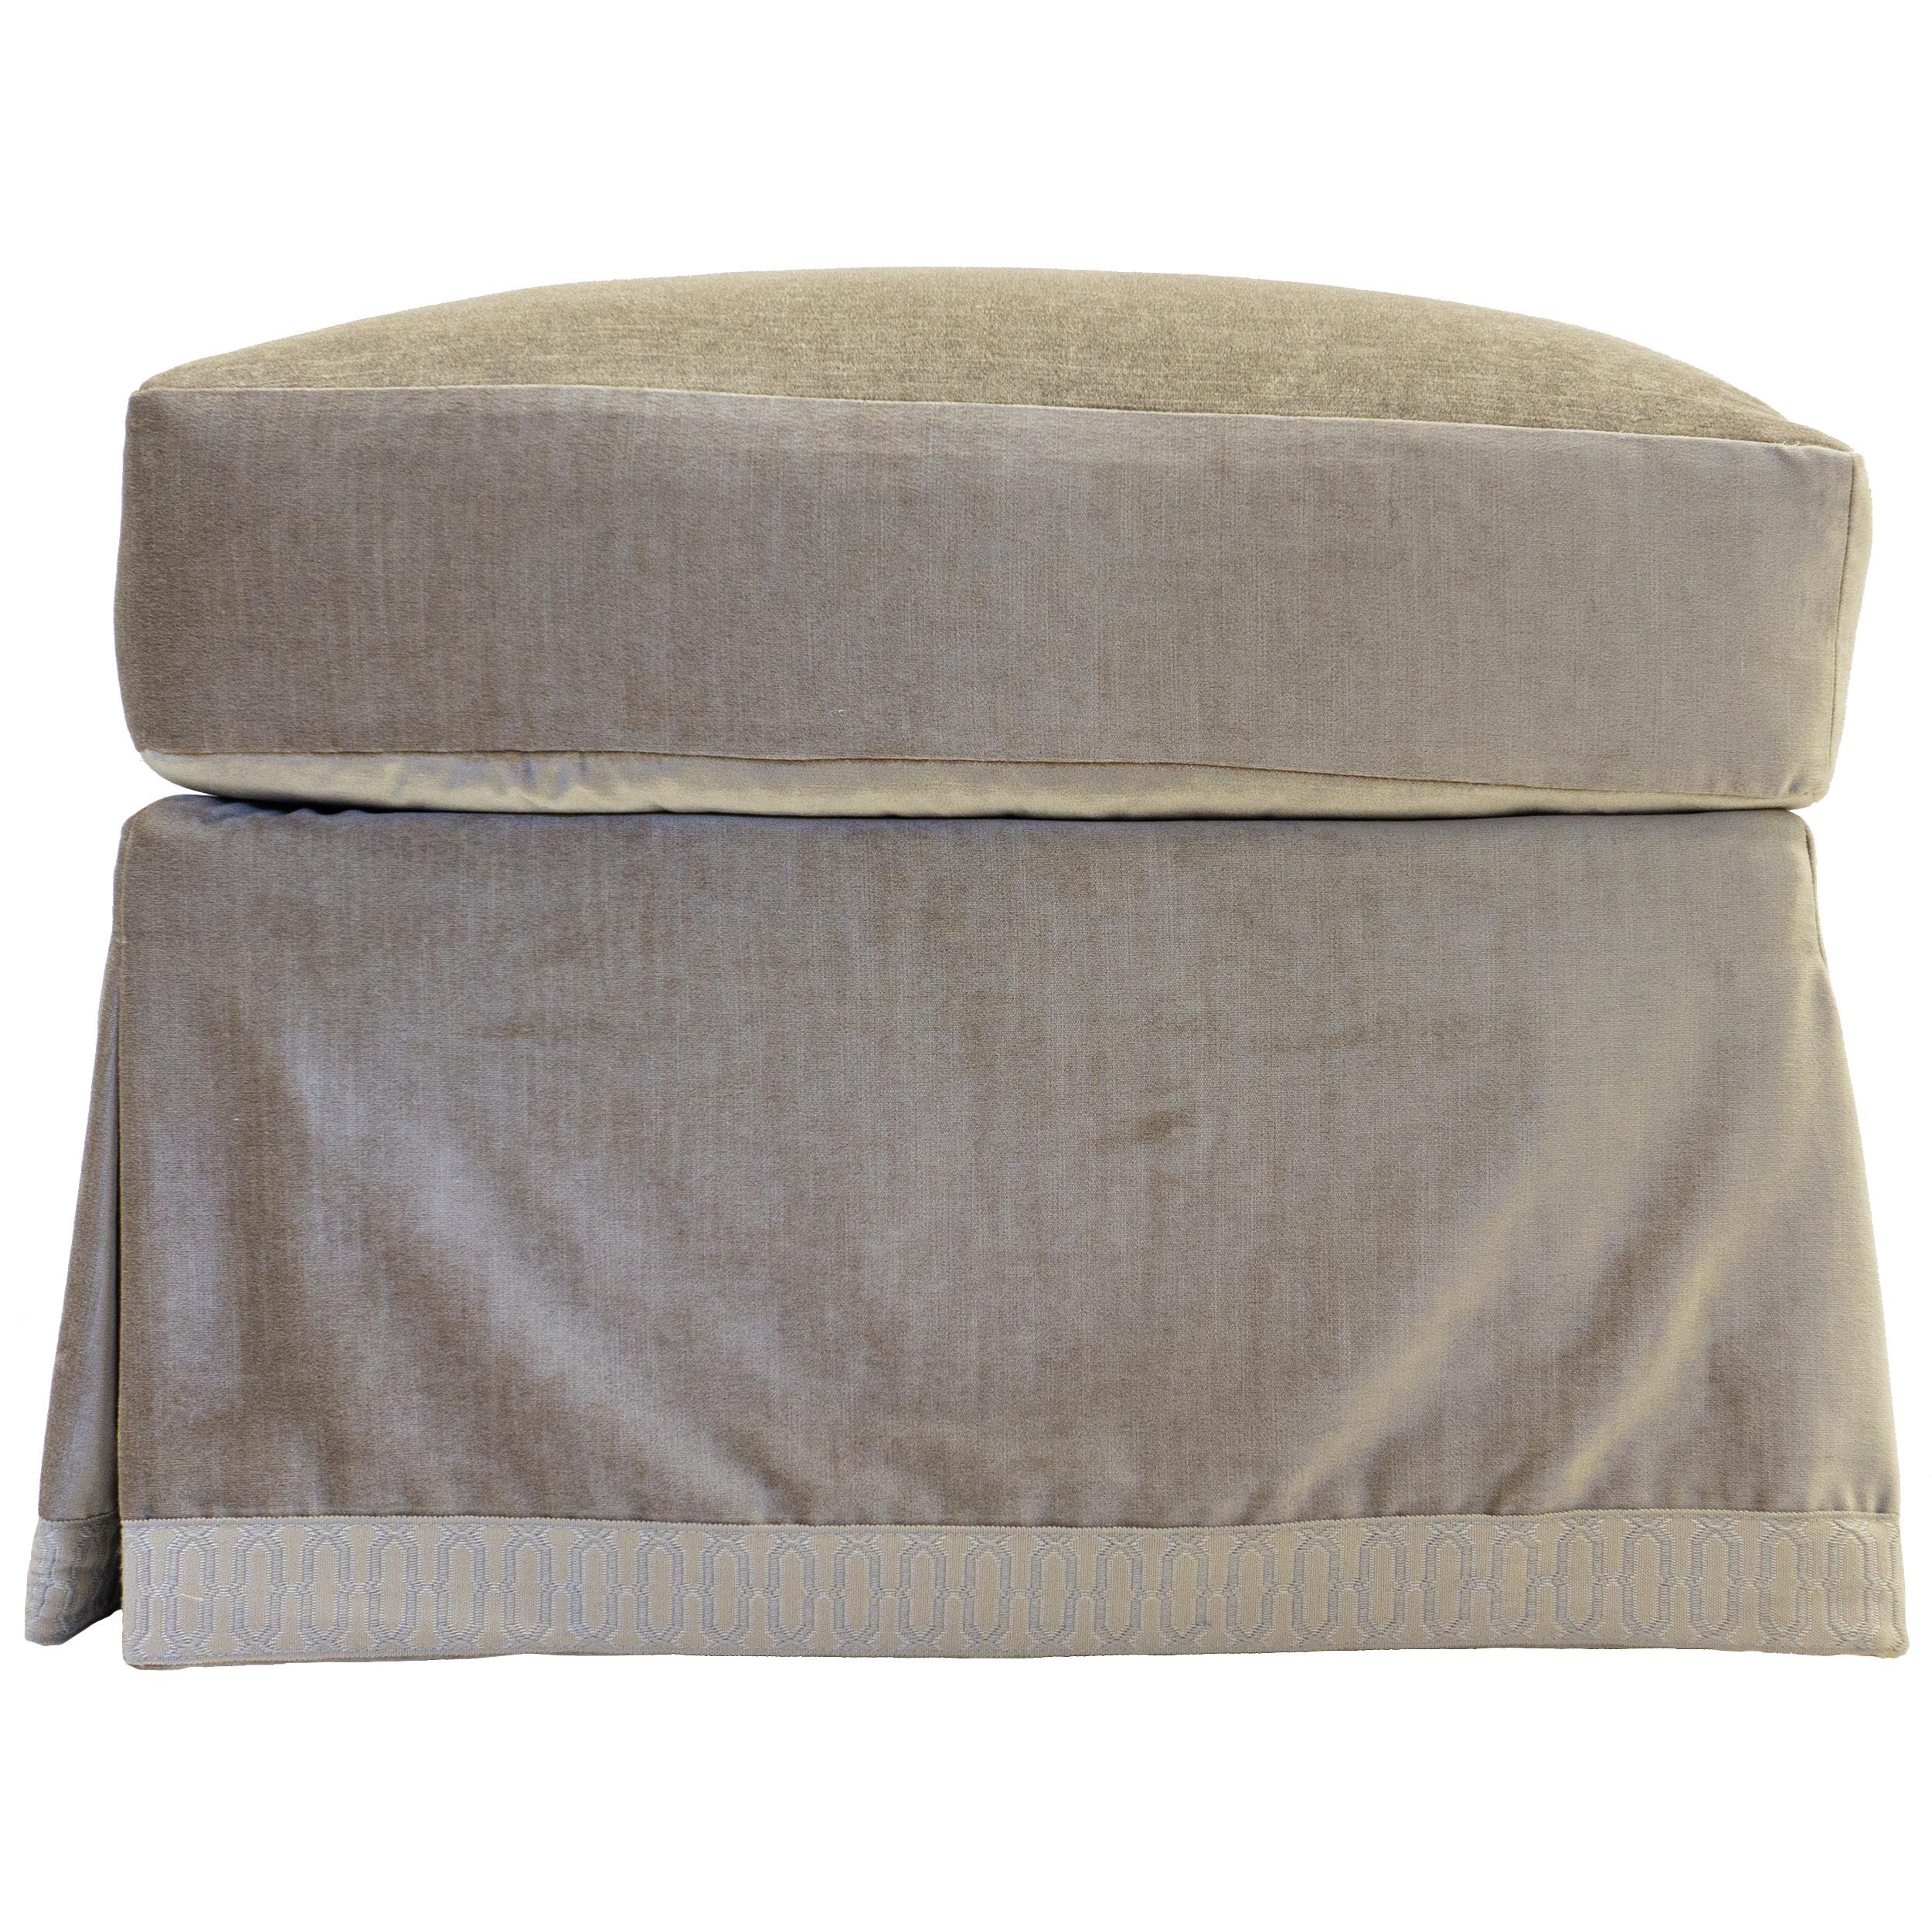 Foam Traditional Skirted Ottoman / Bench, Customizable For Sale